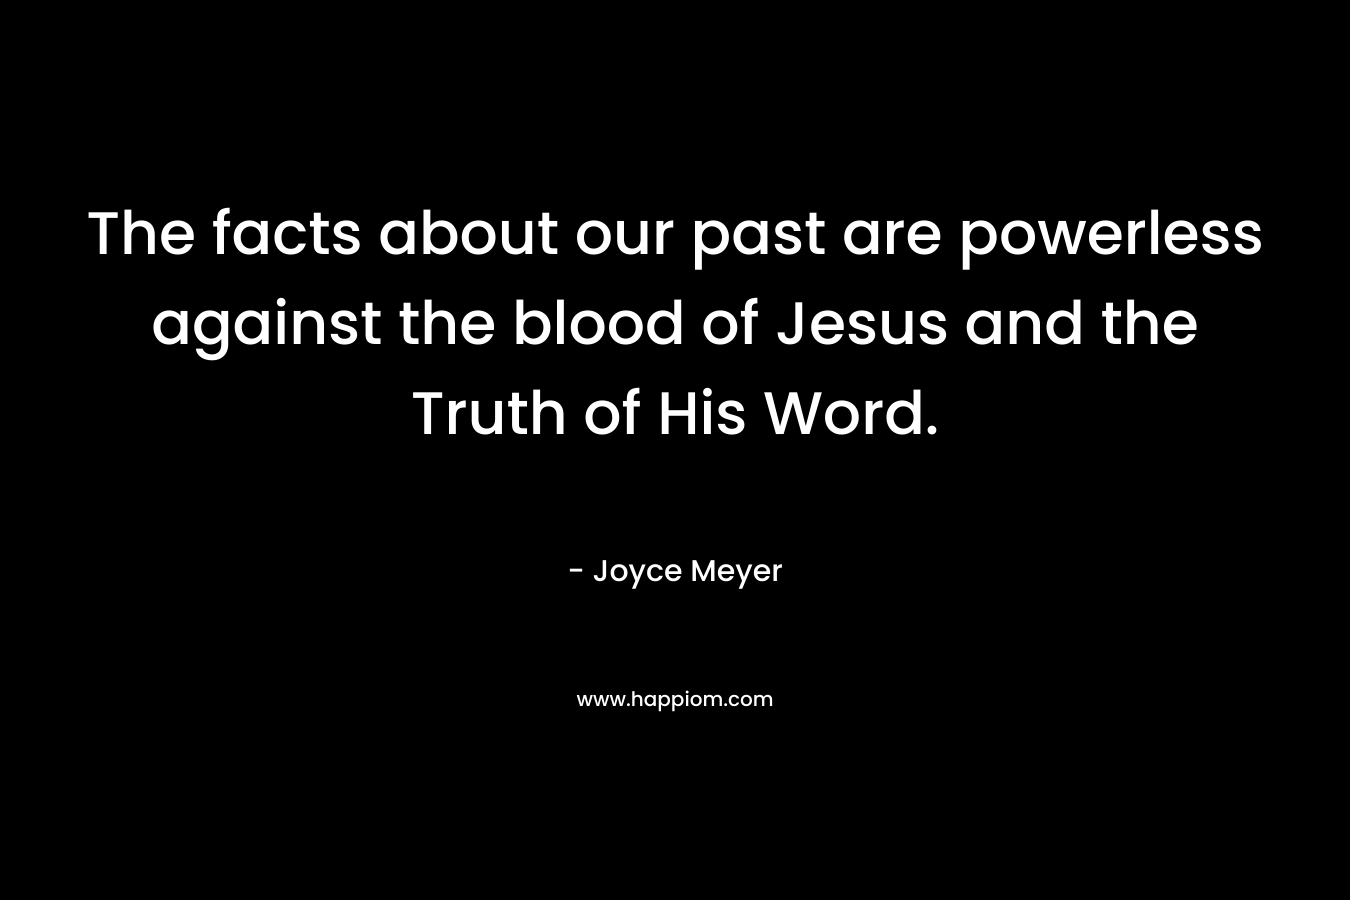 The facts about our past are powerless against the blood of Jesus and the Truth of His Word. – Joyce Meyer